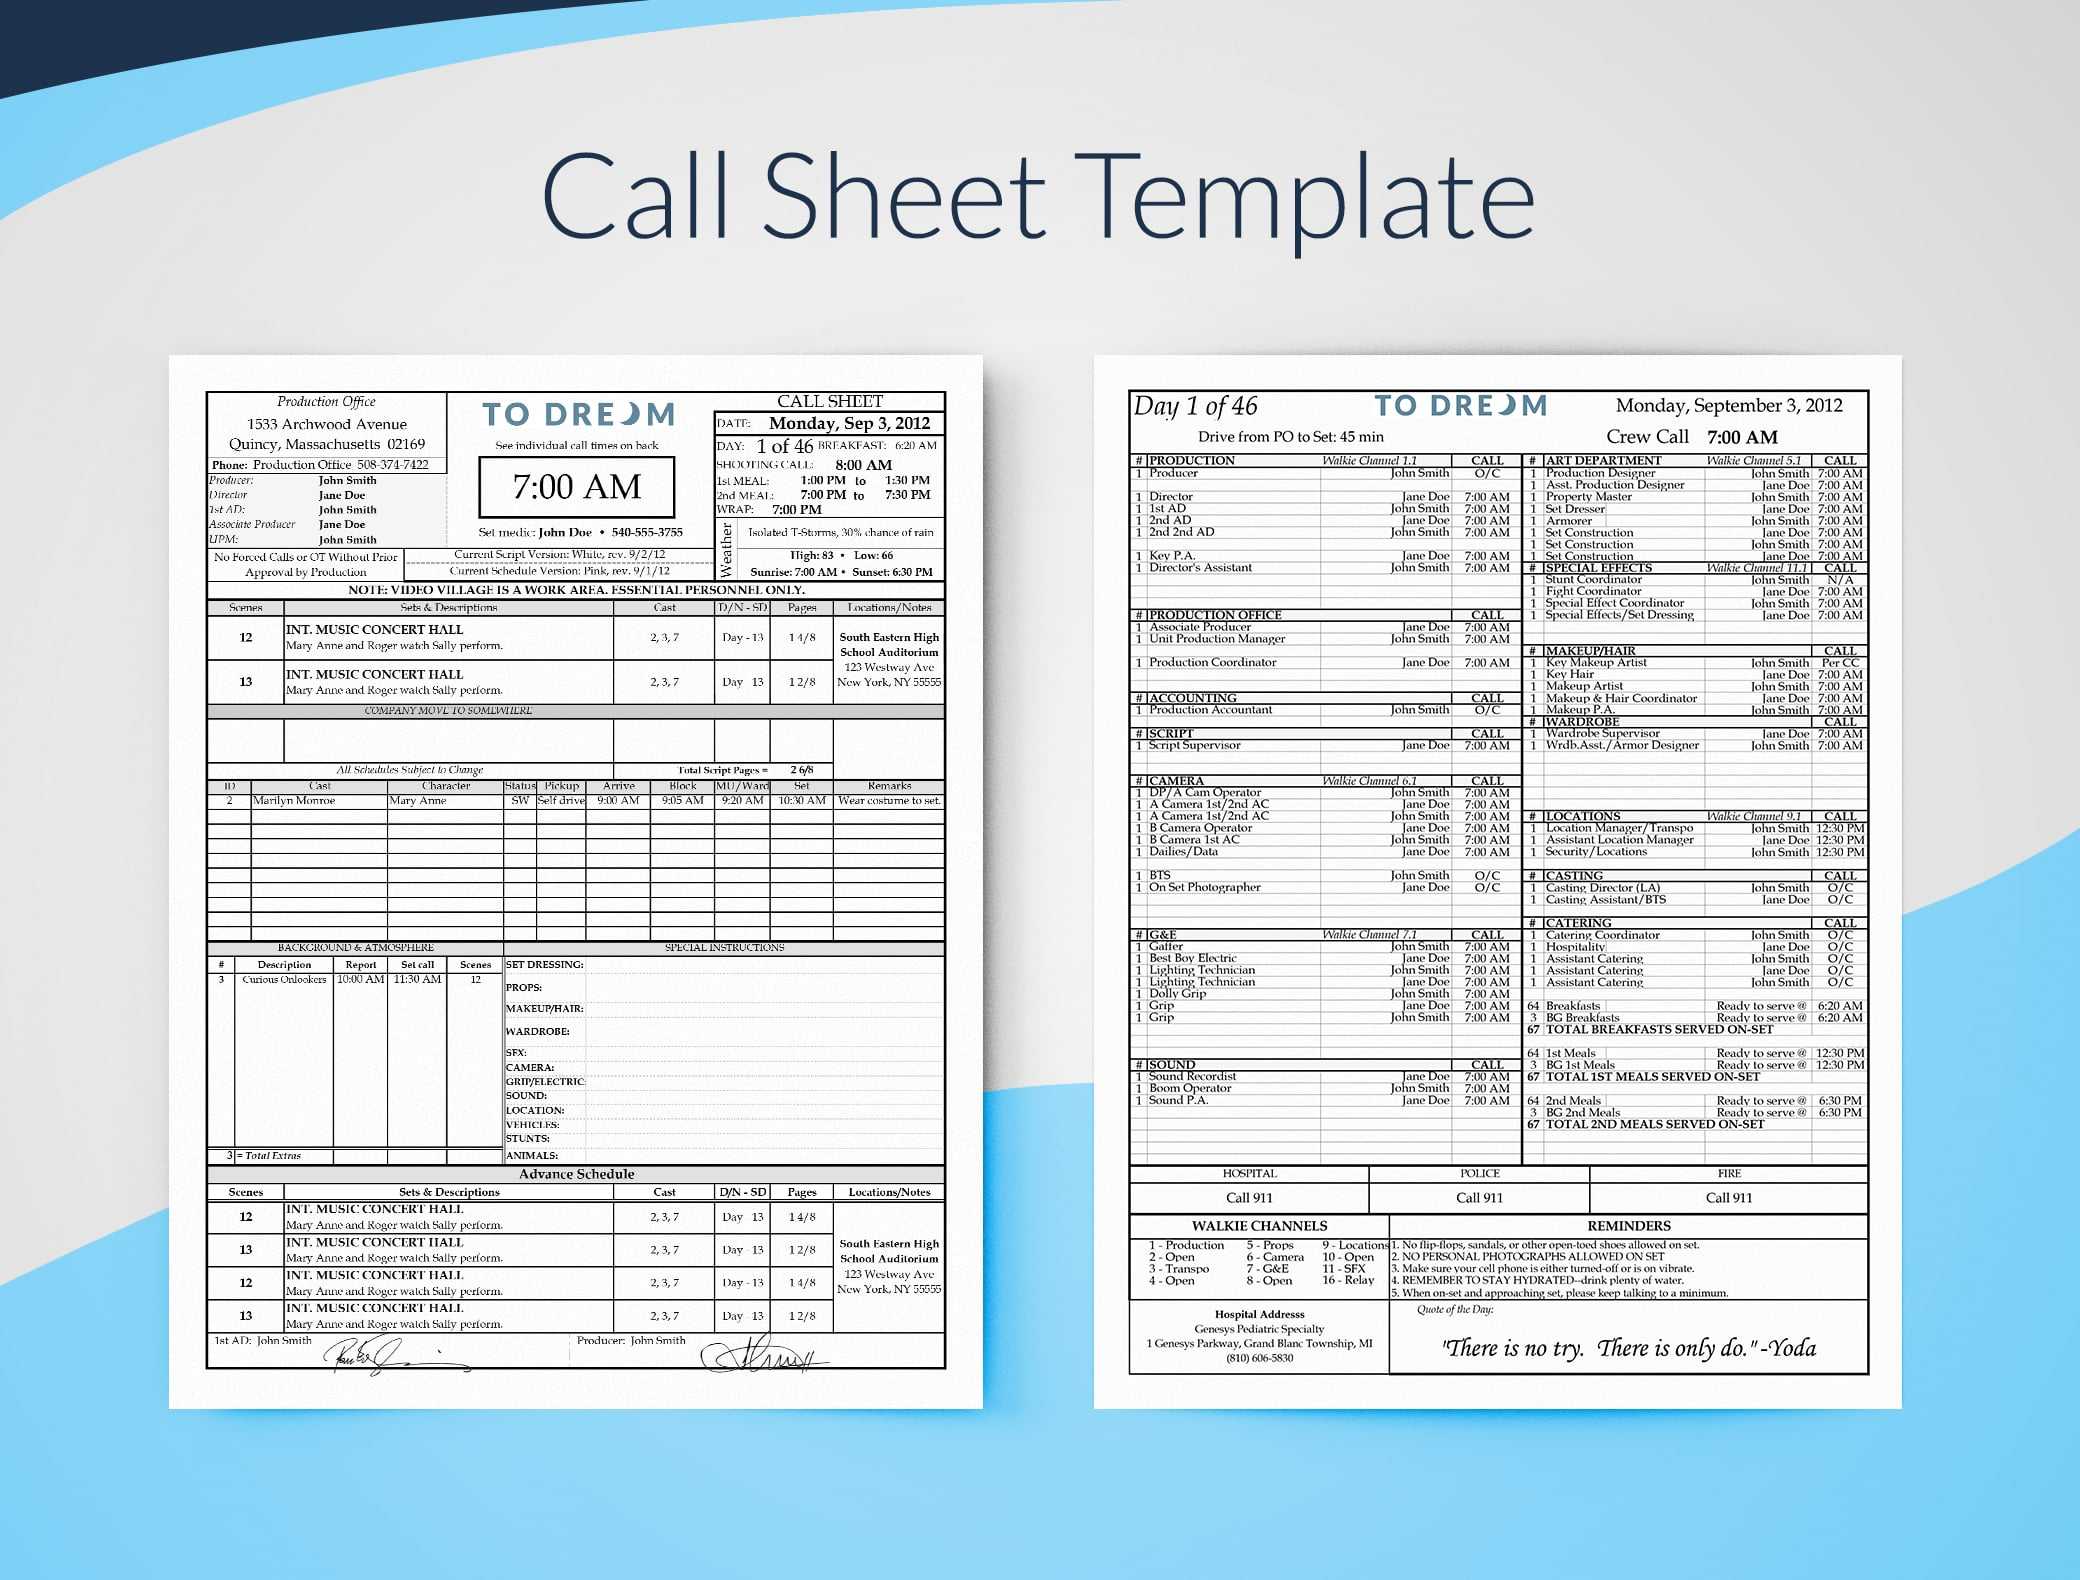 Call Sheet Template For Excel – Free Download | Sethero Throughout Blank Call Sheet Template